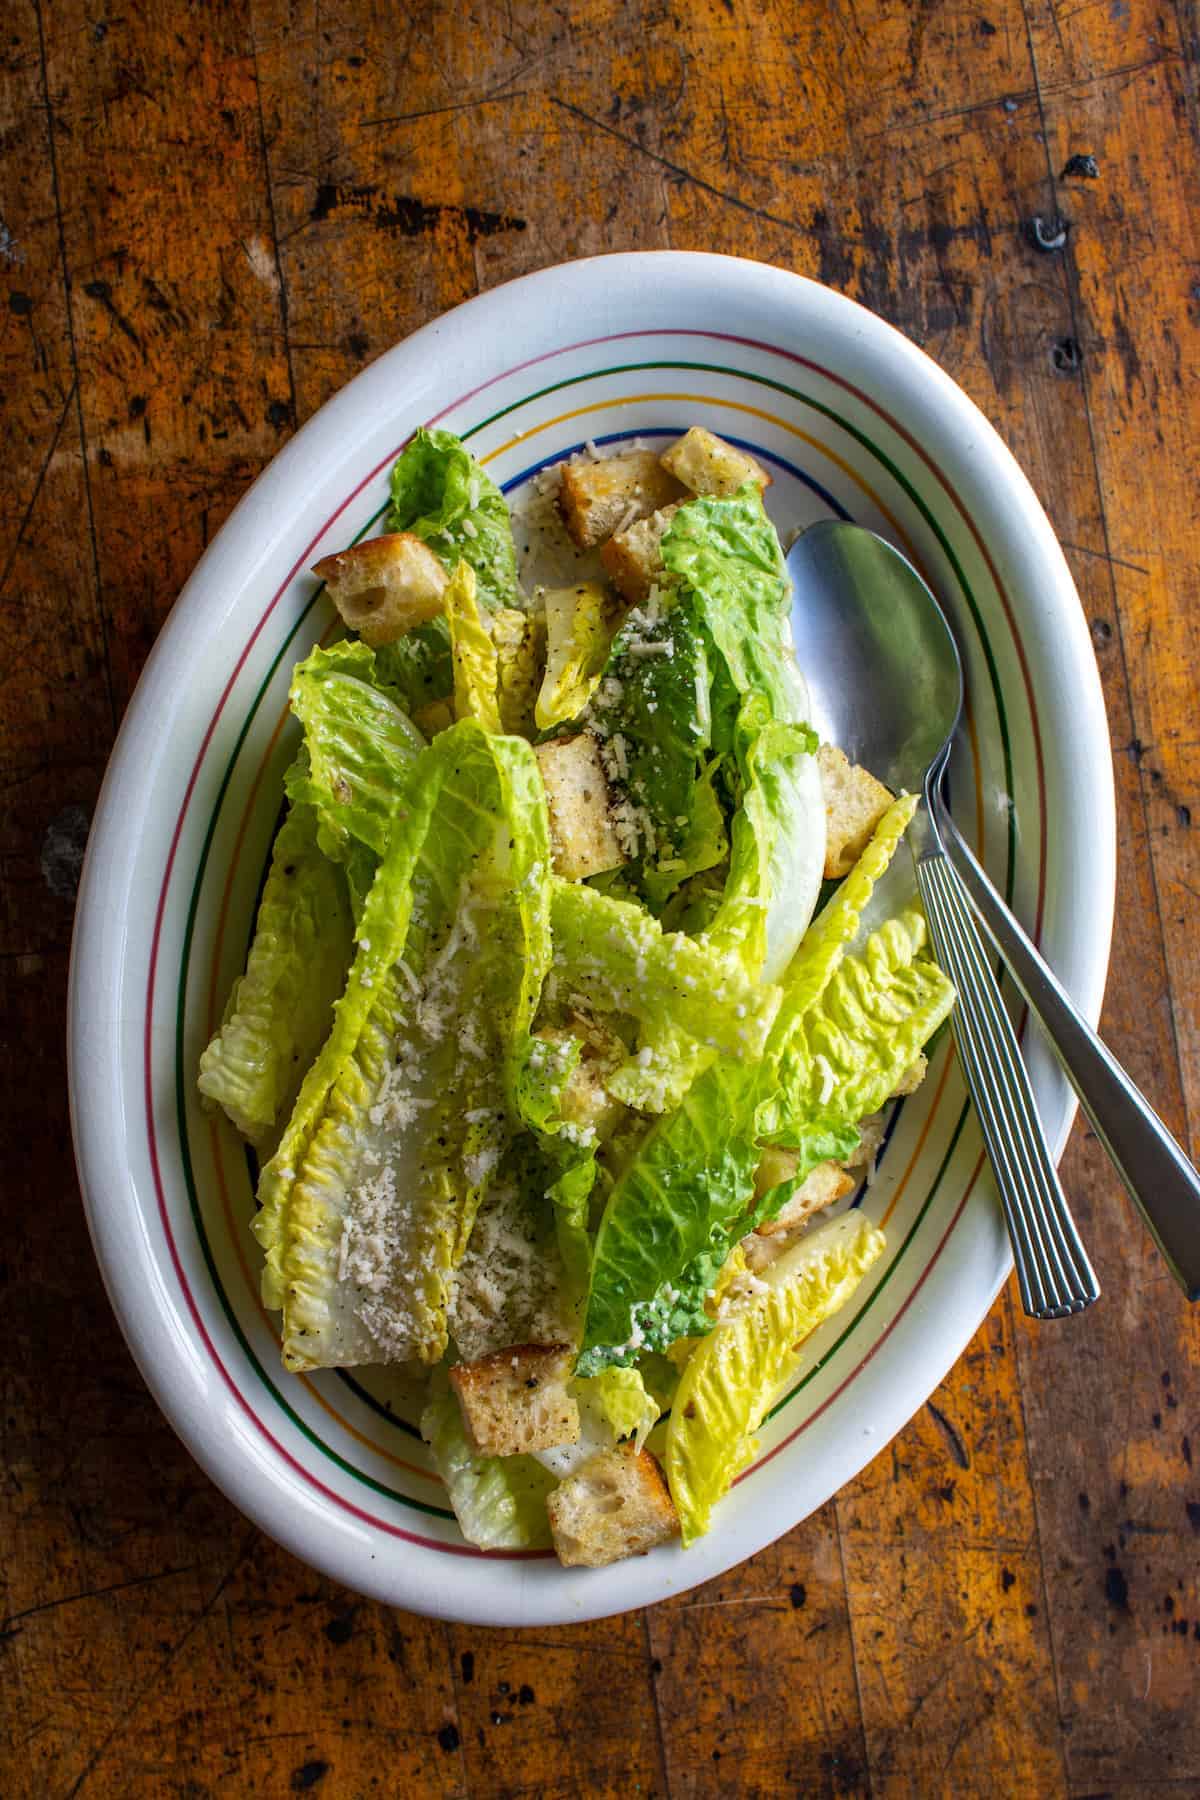 A super easy Caesar salad recipe with no raw egg but all the lemony-garlic flavor you love about this classic crisp salad. #caesarsalad #caesarnoegg #eggfreecaesarsalad #caesarsaladrecipe